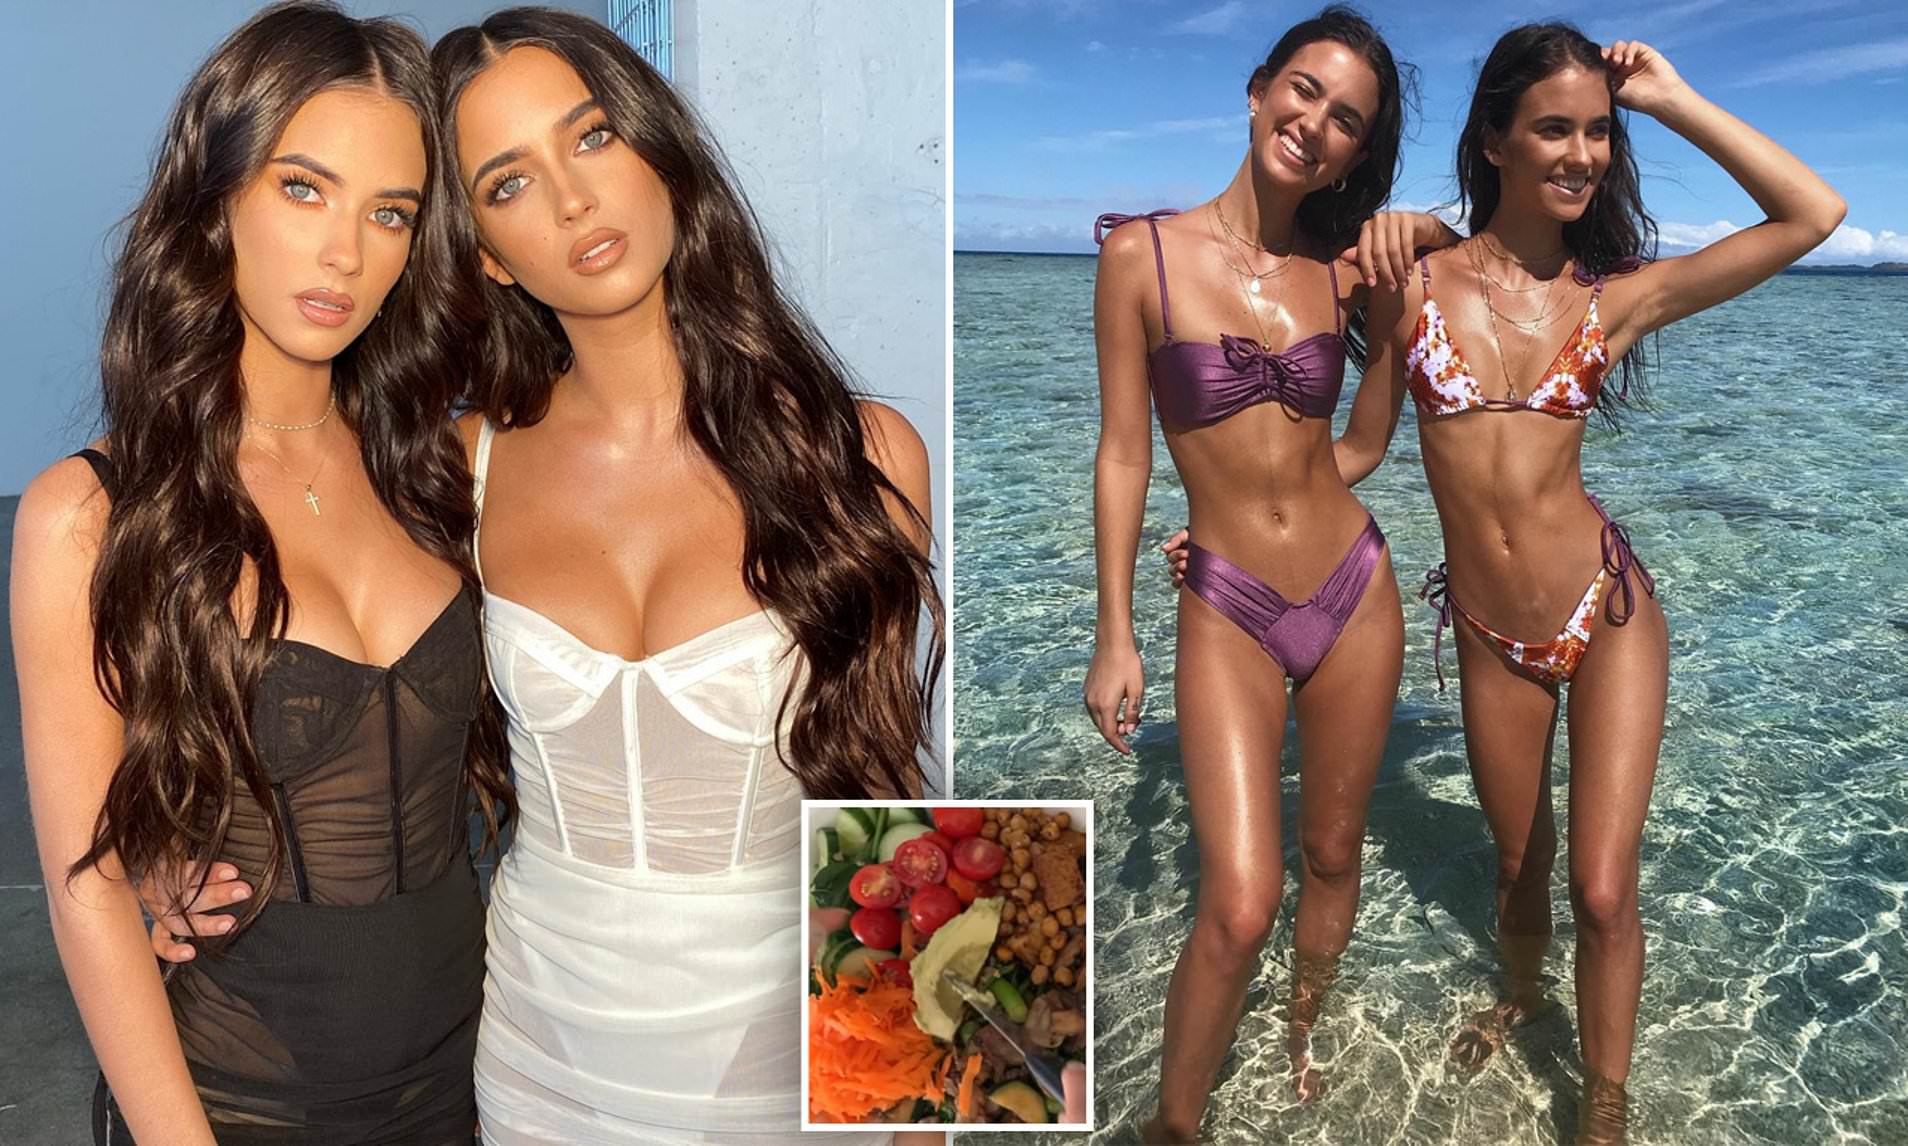 Meet one of the world's sexiest identical twins and their jaw